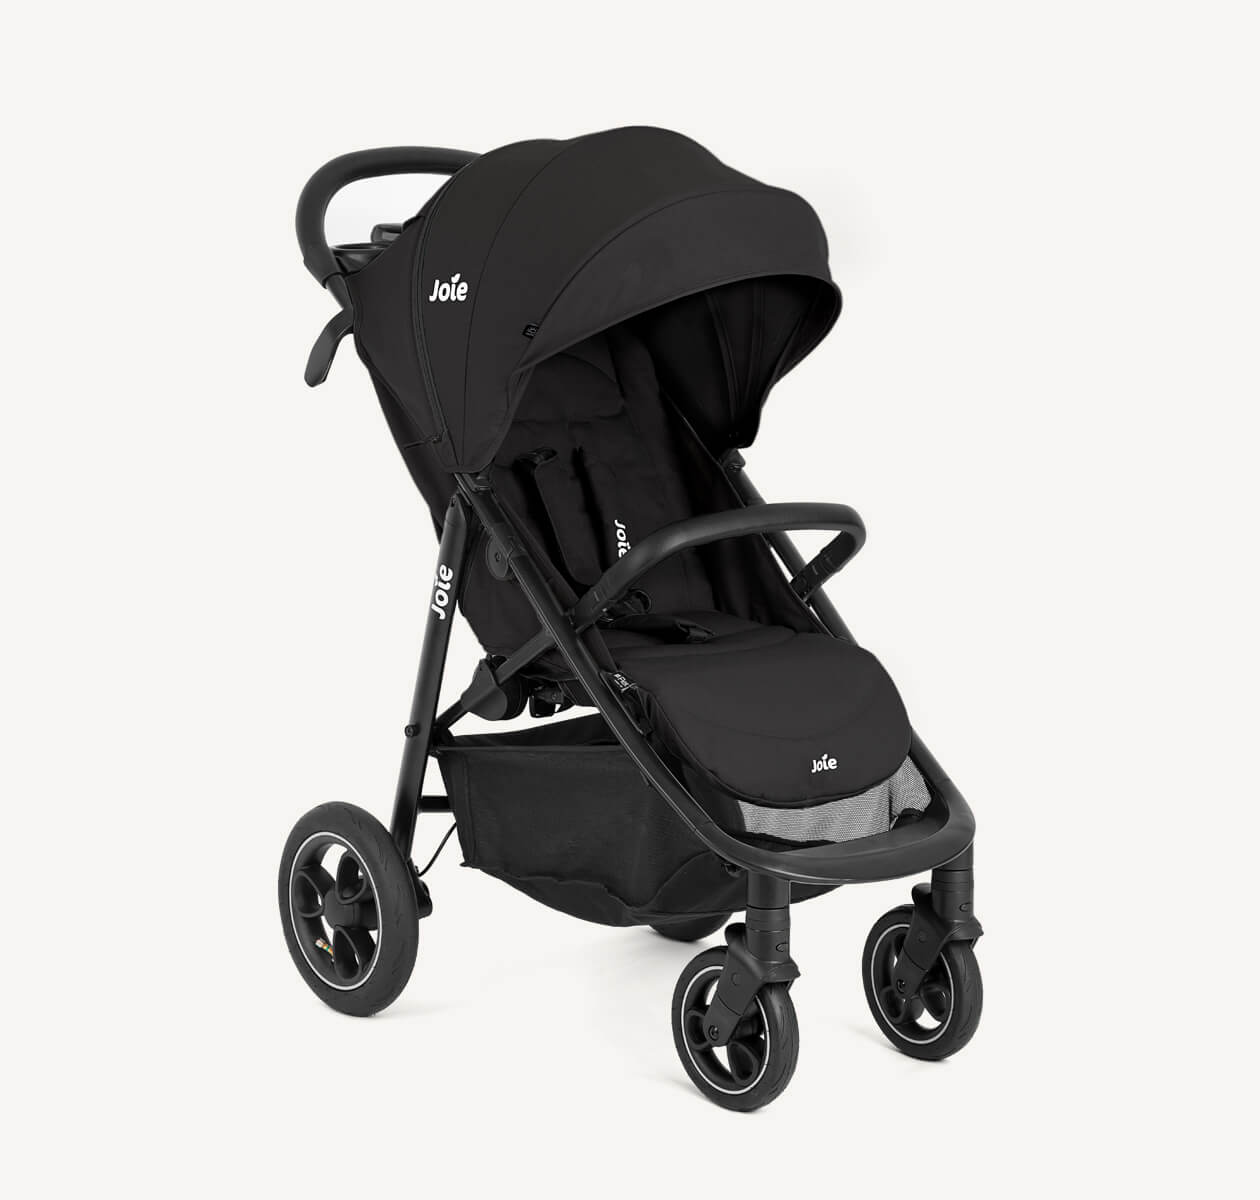 Joie black litetrax pro air stroller at an angle